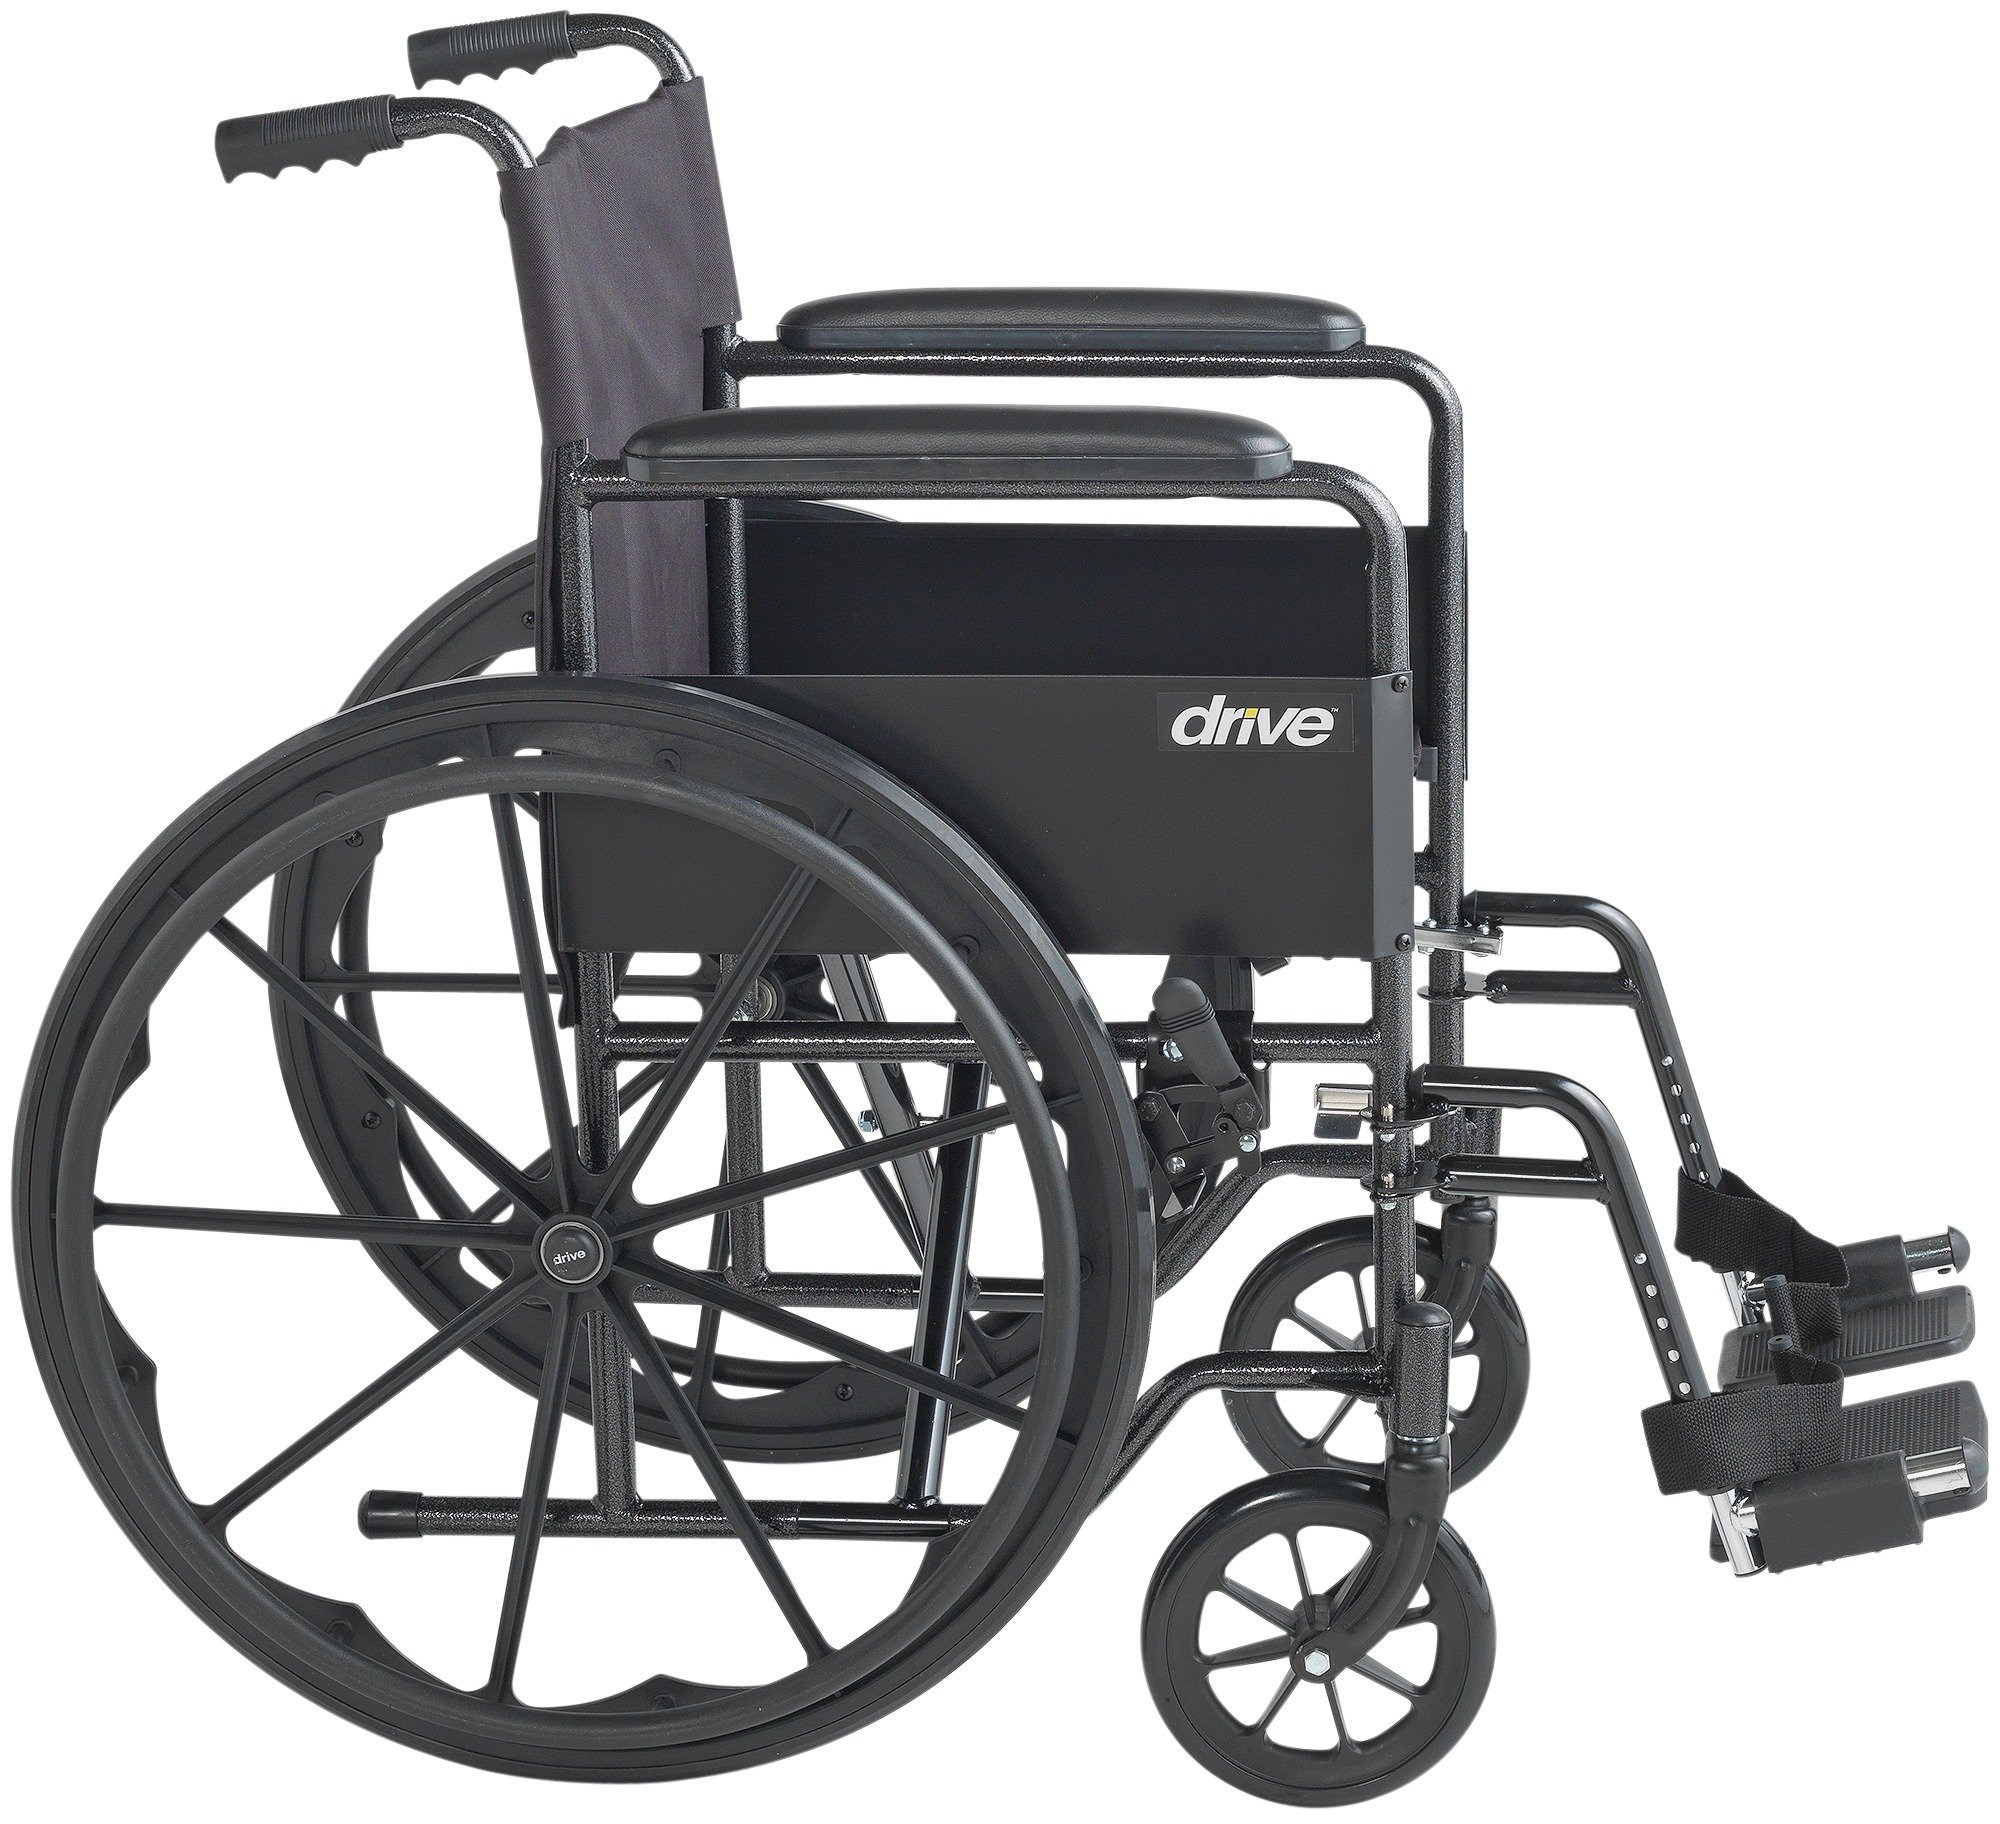 Drive Devilbiss Self Propelled Wheelchair Review